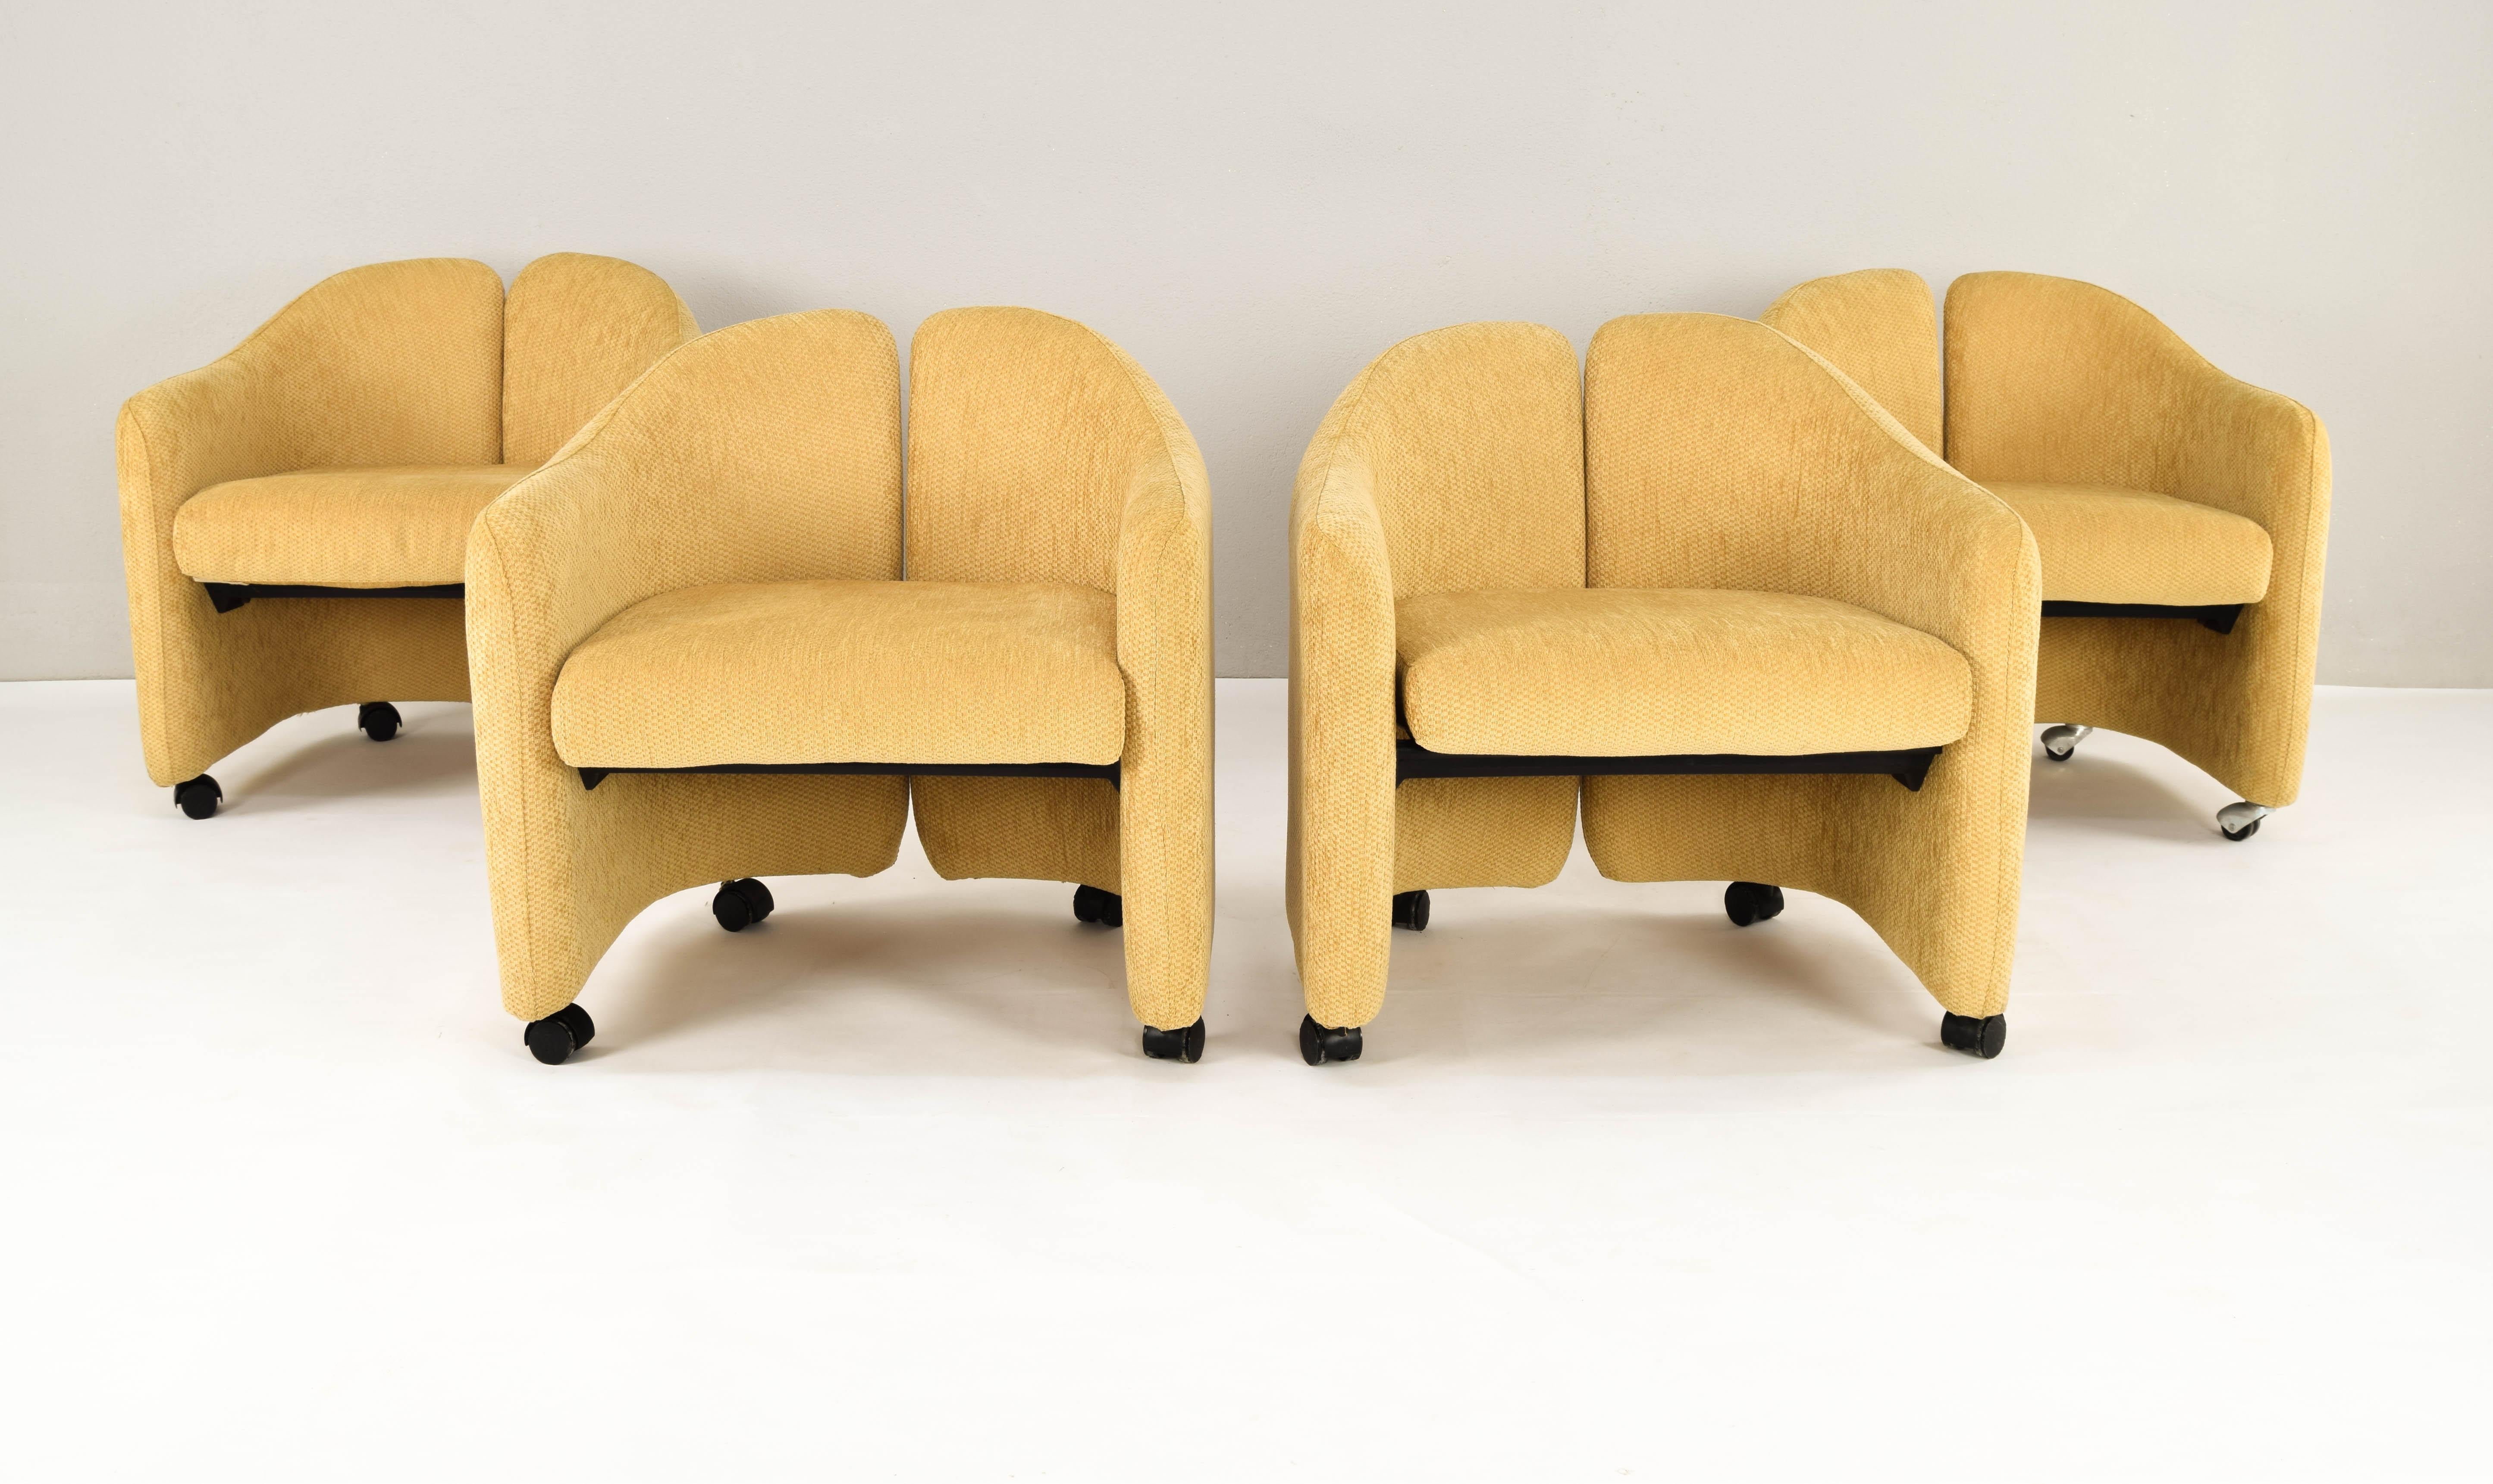 Armchairs designed by Eugenio Gerli for Tecno Italia and manufactured in Spain under license from the Martinez Medina company in cream color. Metallic structure, padded in polyurethane foam, covered with a beautiful beige wool upholstery in an